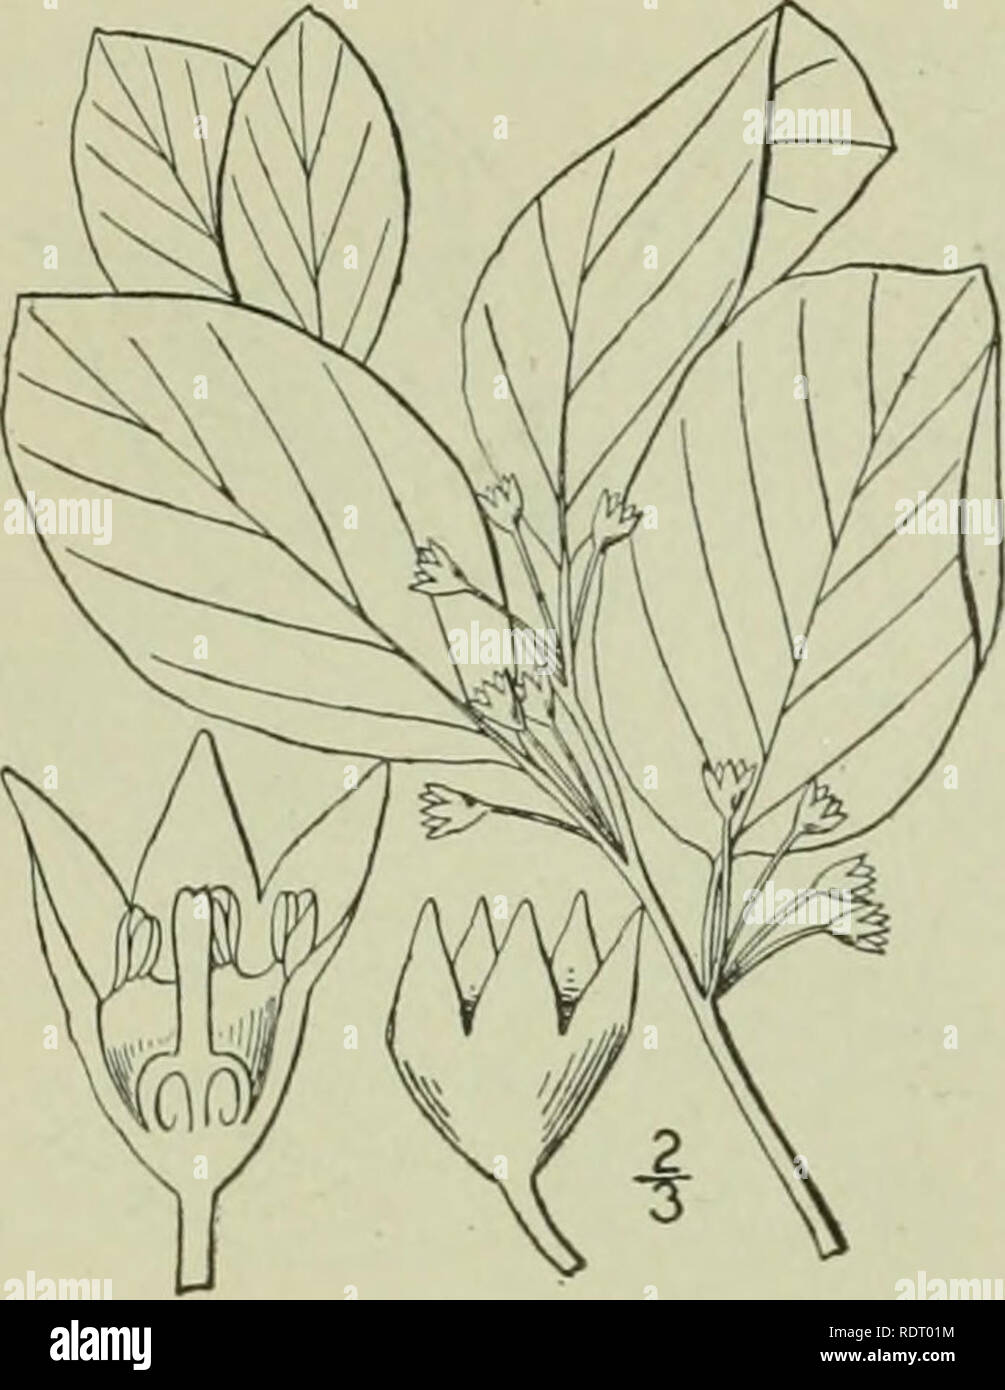 . An illustrated flora of the northern United States, Canada and the British possessions : from Newfoundland to the parallel of the southern boundary of Virginia and from the Atlantic Ocean westward to the 102nd meridian. Botany. RHAMNACEAE,. 5. Rhamnus Frangula L. Alder Buckthorn. Black Dogwood. Fig. 2827. Rhamnus Frangula L. Sp. PI. 193. 1753. A shrub, reaching a maximum height of about 8Â°, the young twigs finely and sparsely puberulent. Leaves thin, elliptic or obovate, entire or very ob- scurely crenulate, glabrous on both surfaces, obtuse or cuspidate at the apex, rounded or narrowed at  Stock Photo